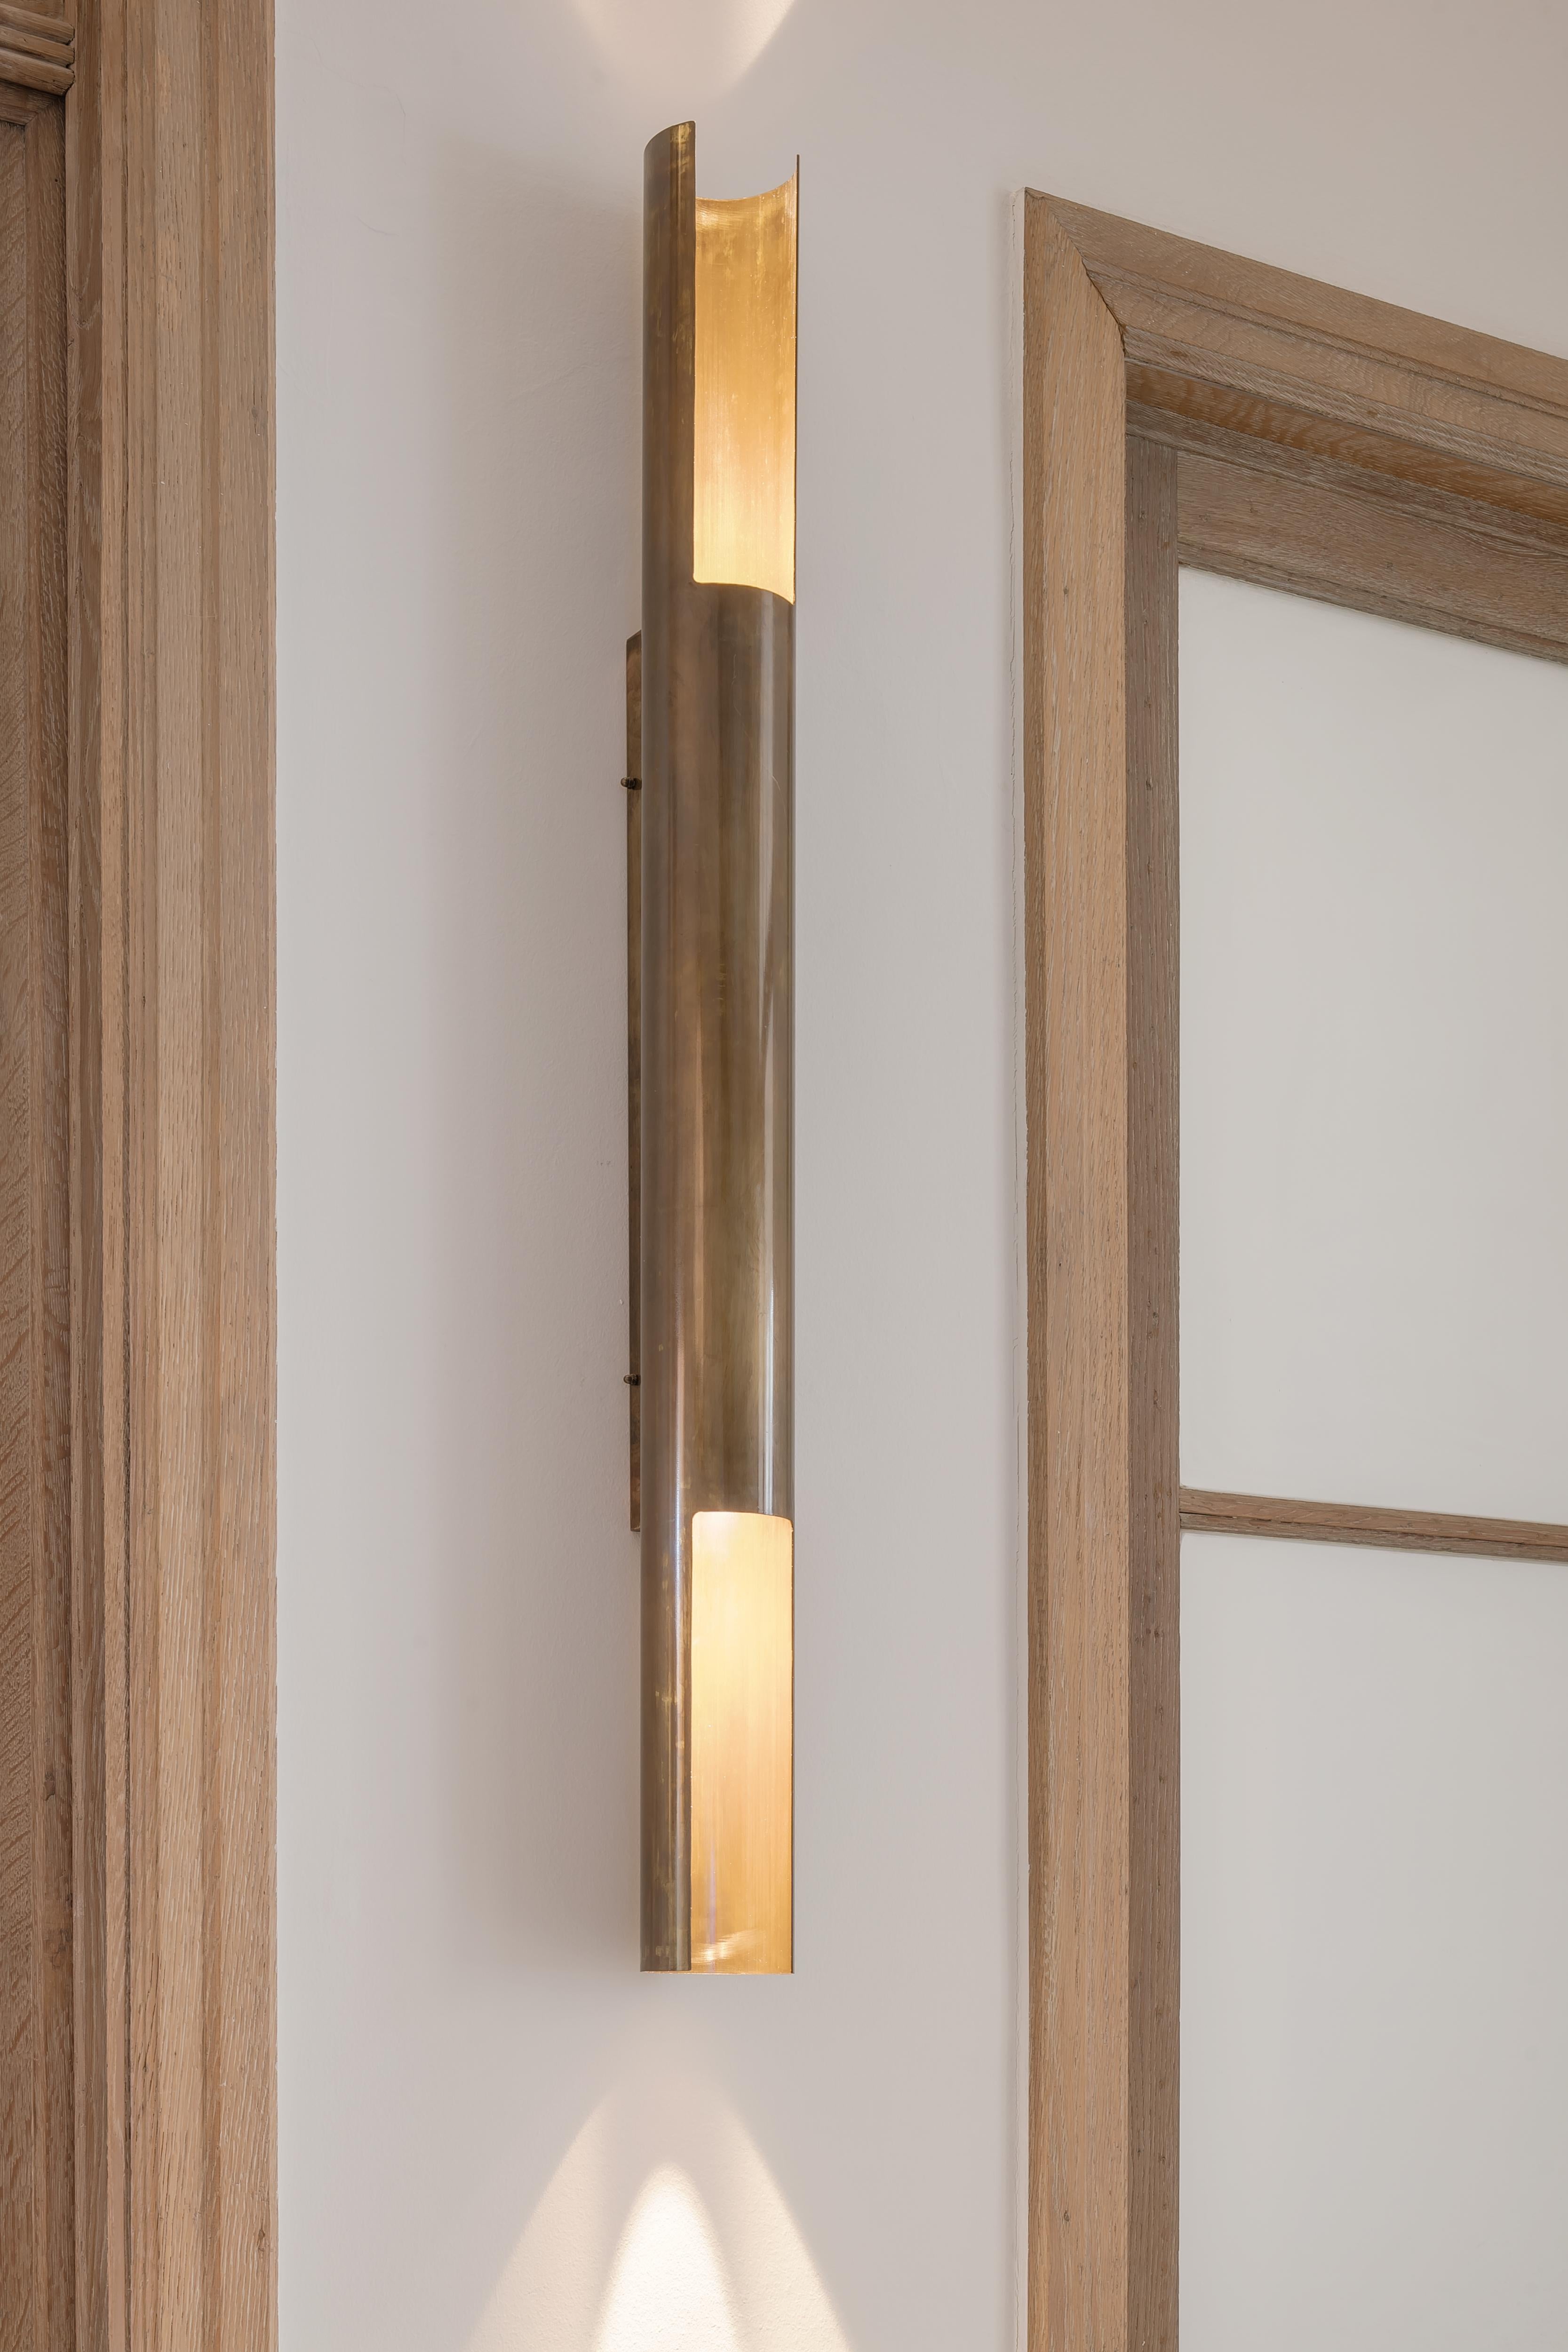 This wall sconce, made by hand is unique by nature. The finishing will vary since this is made by hand, perfect imperfect. It requires 2 Gu10 LED bulbs. Dimmable and interchangeable bulbs.
The Ferry comes in 3 versions; large, medium and small.